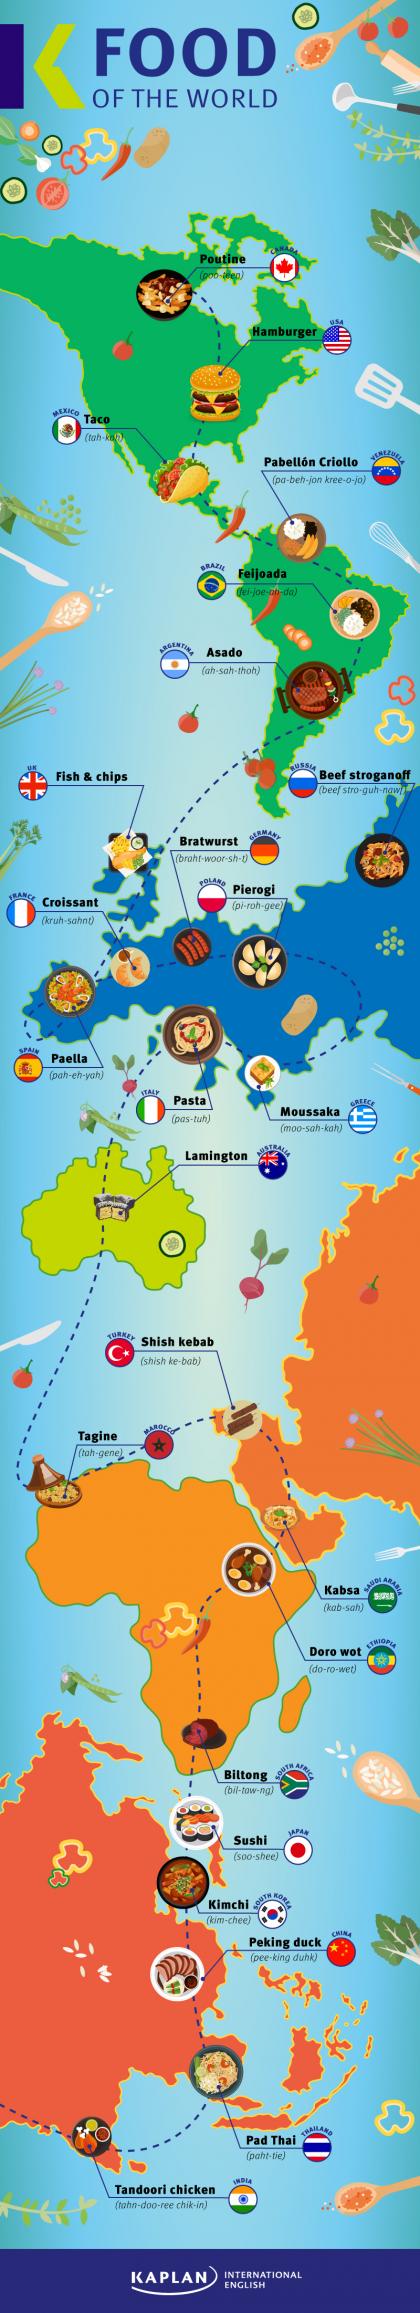 Food_of_the_world_infographic